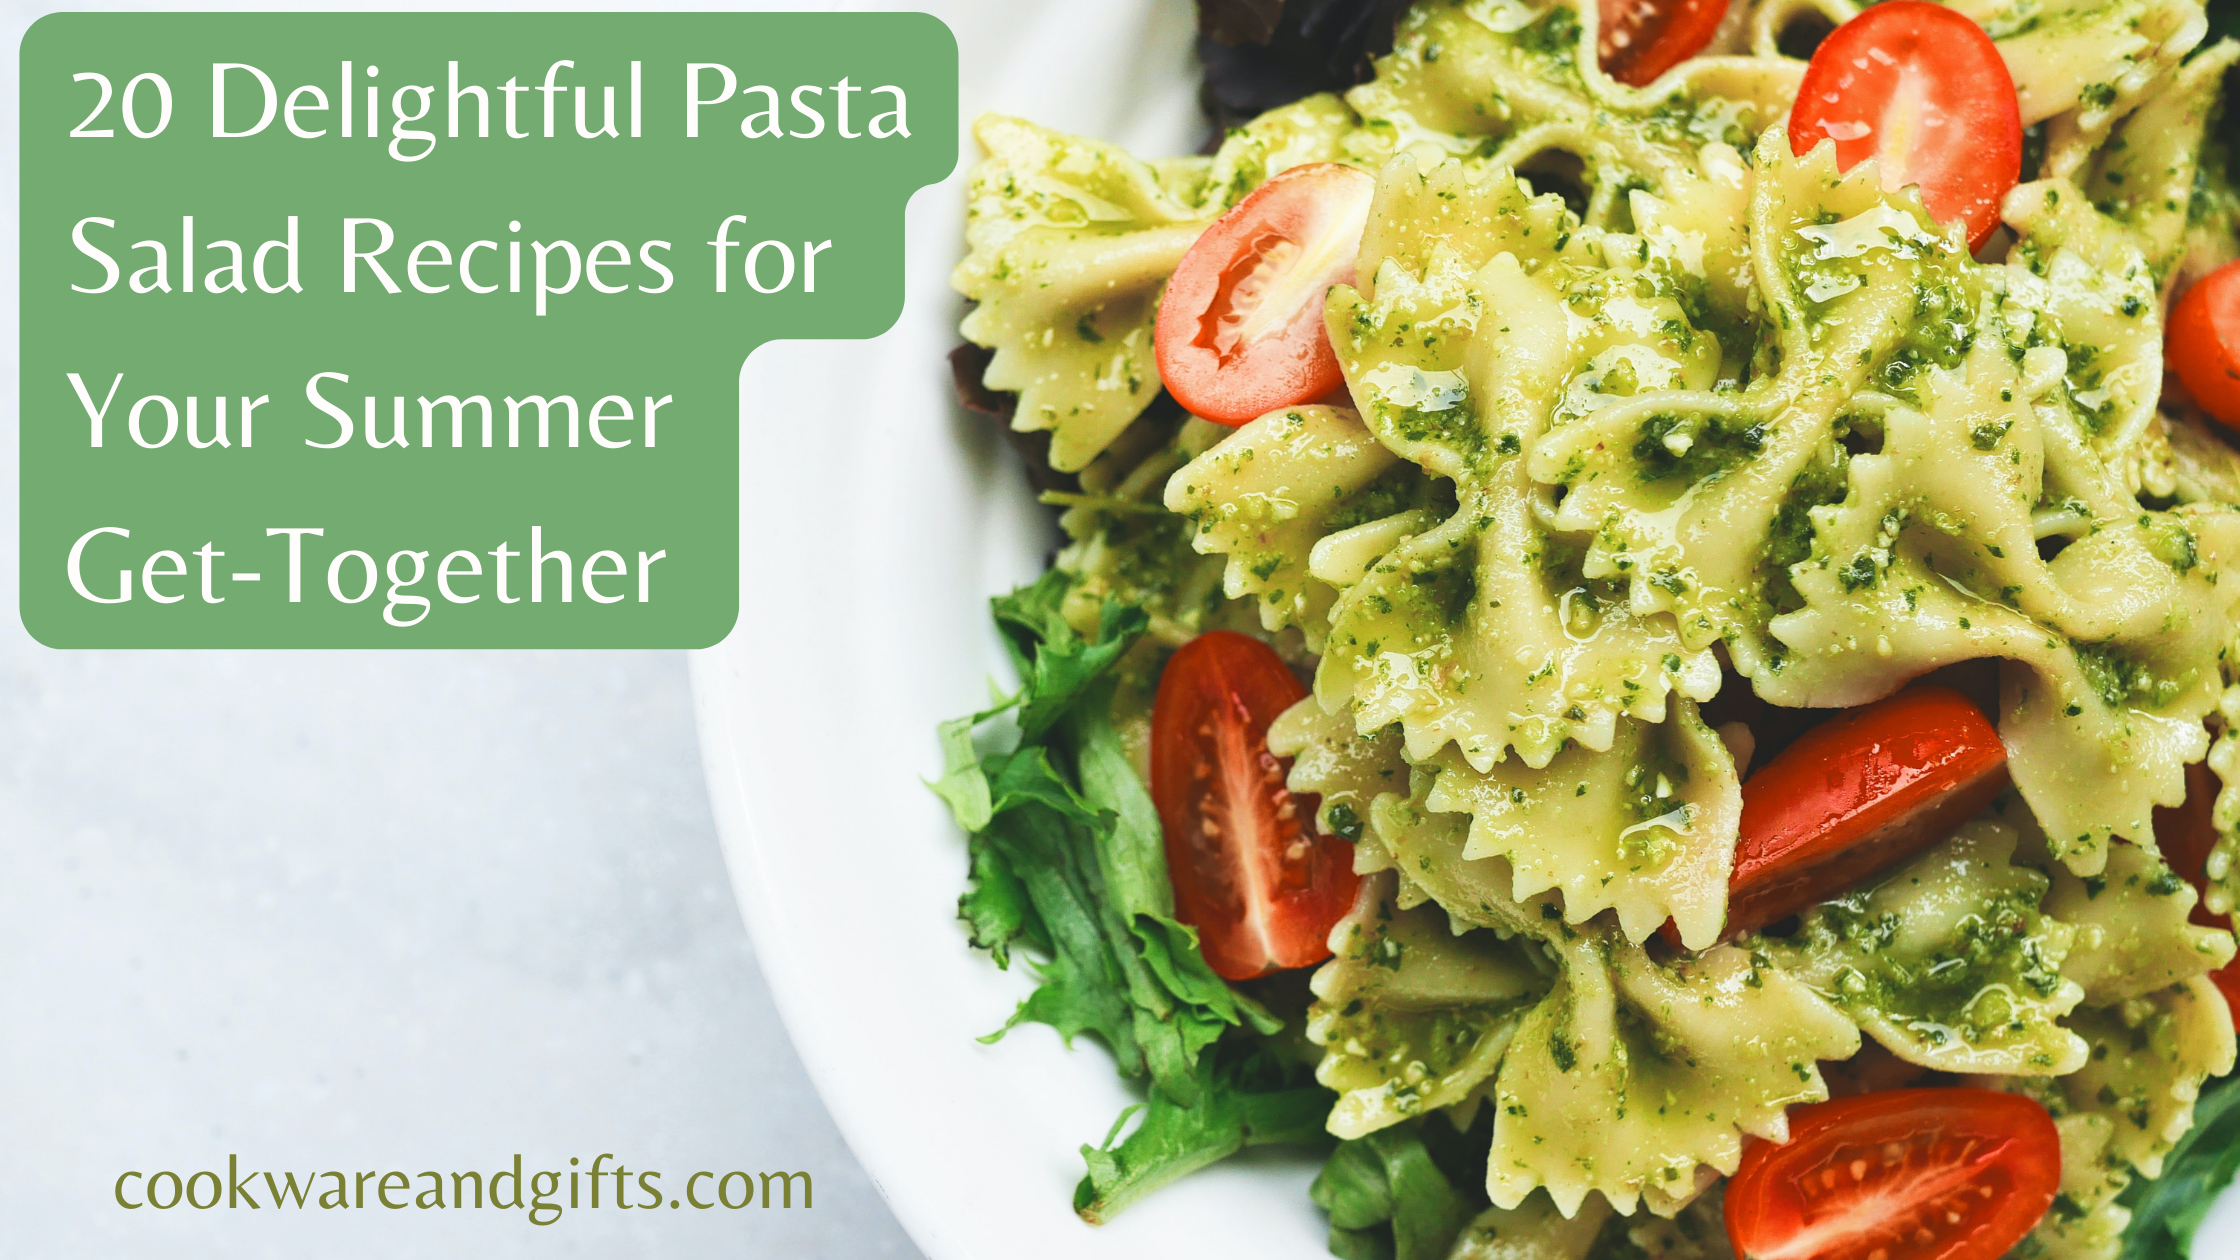 20 Delightfully Simple Pasta Salad Recipes for Your Summer Get-Togethers